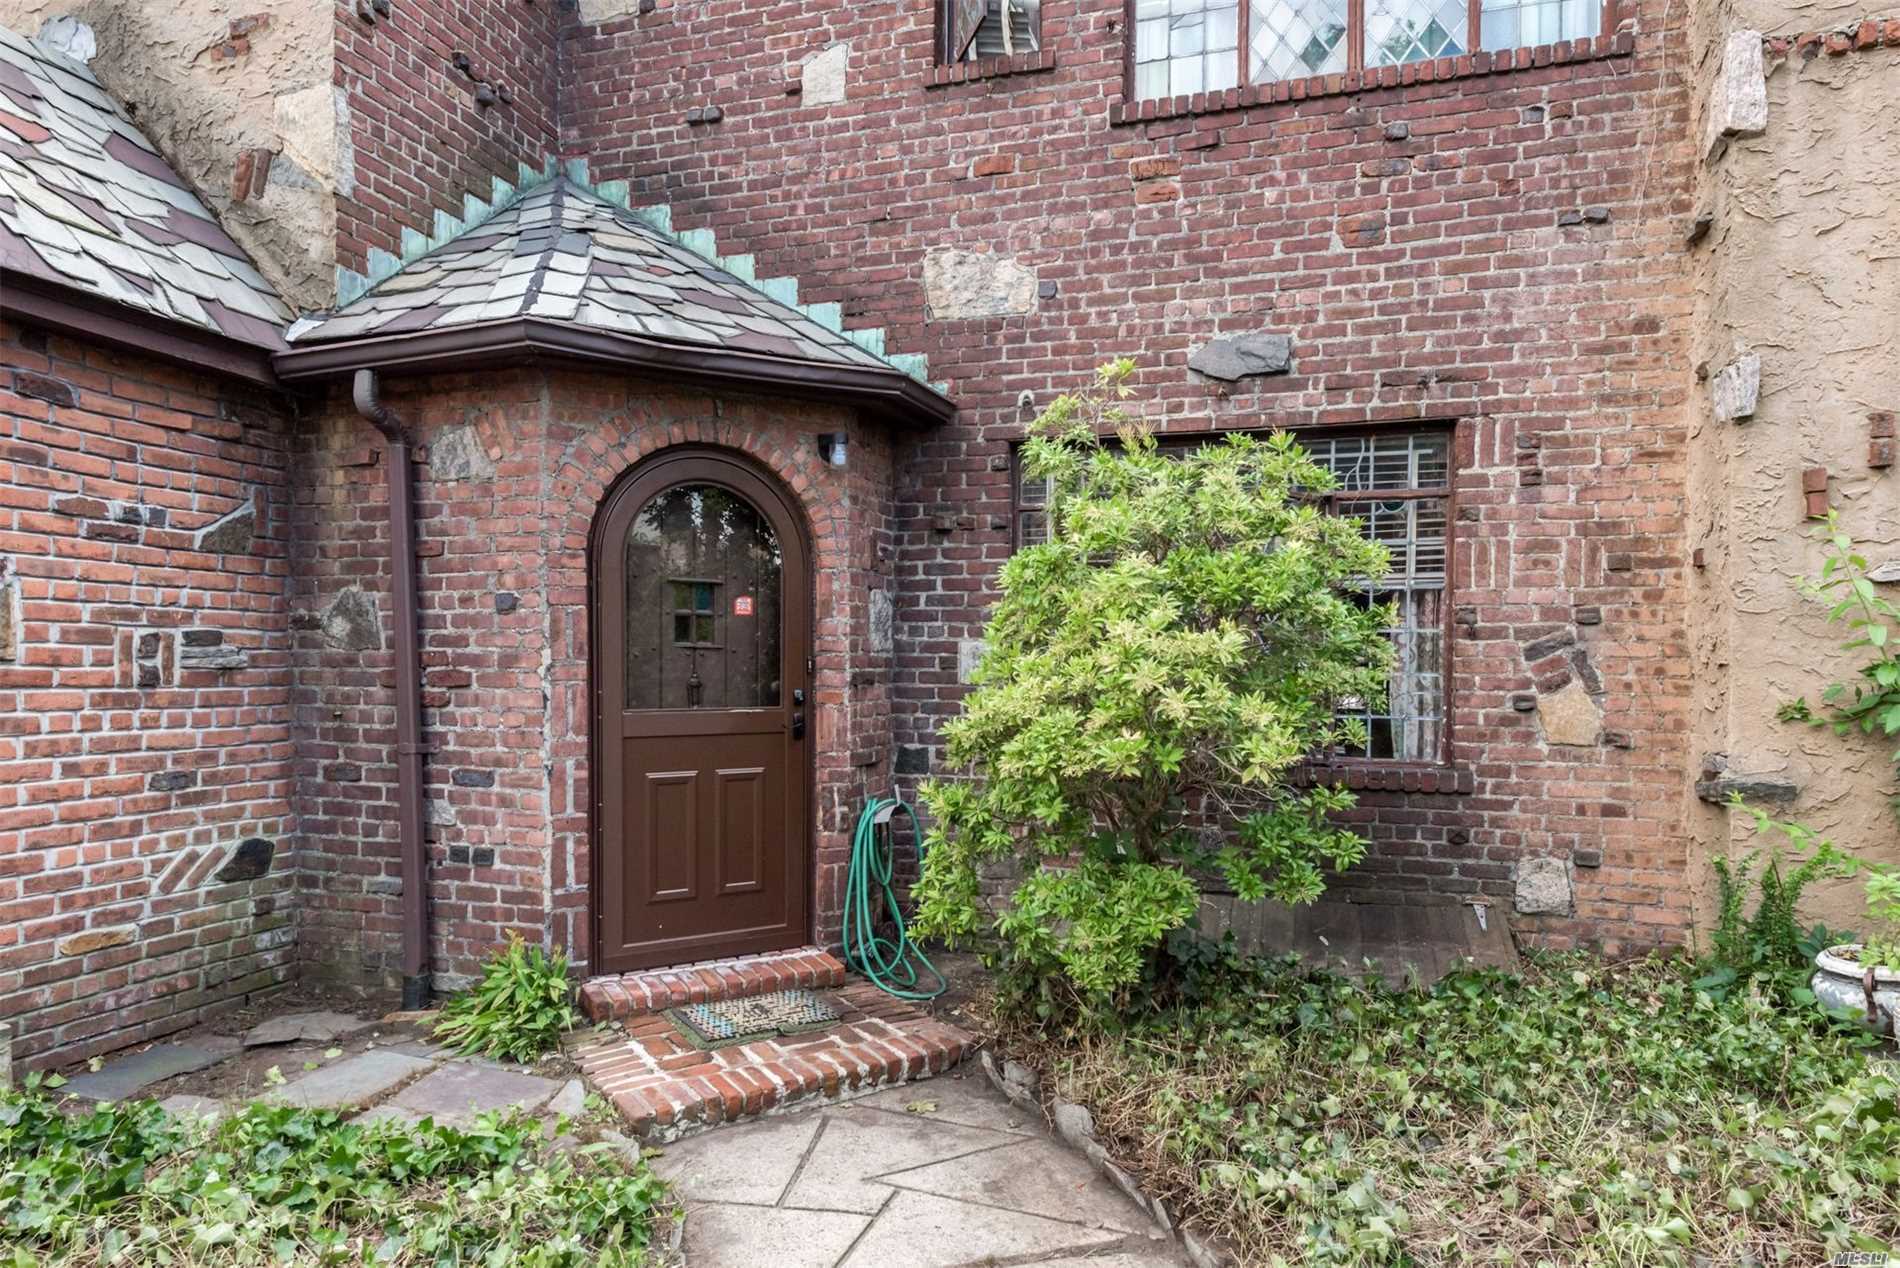 One Of A Kind! Charming Tom Jones English Tudor On Quiet Treelined Street In The Heart Of Beautiful Auburndale. Sch Dst. 25. Transportation Lirr, Buslines: Q26, Q27 Along 45th Ave To #7 Train. Q31 To Jamaica Station. 5 Minute Walk To Supermarket /All Shopping. Q12, Q13 & All Express Buses Along Northern Blvd To Manhattan.